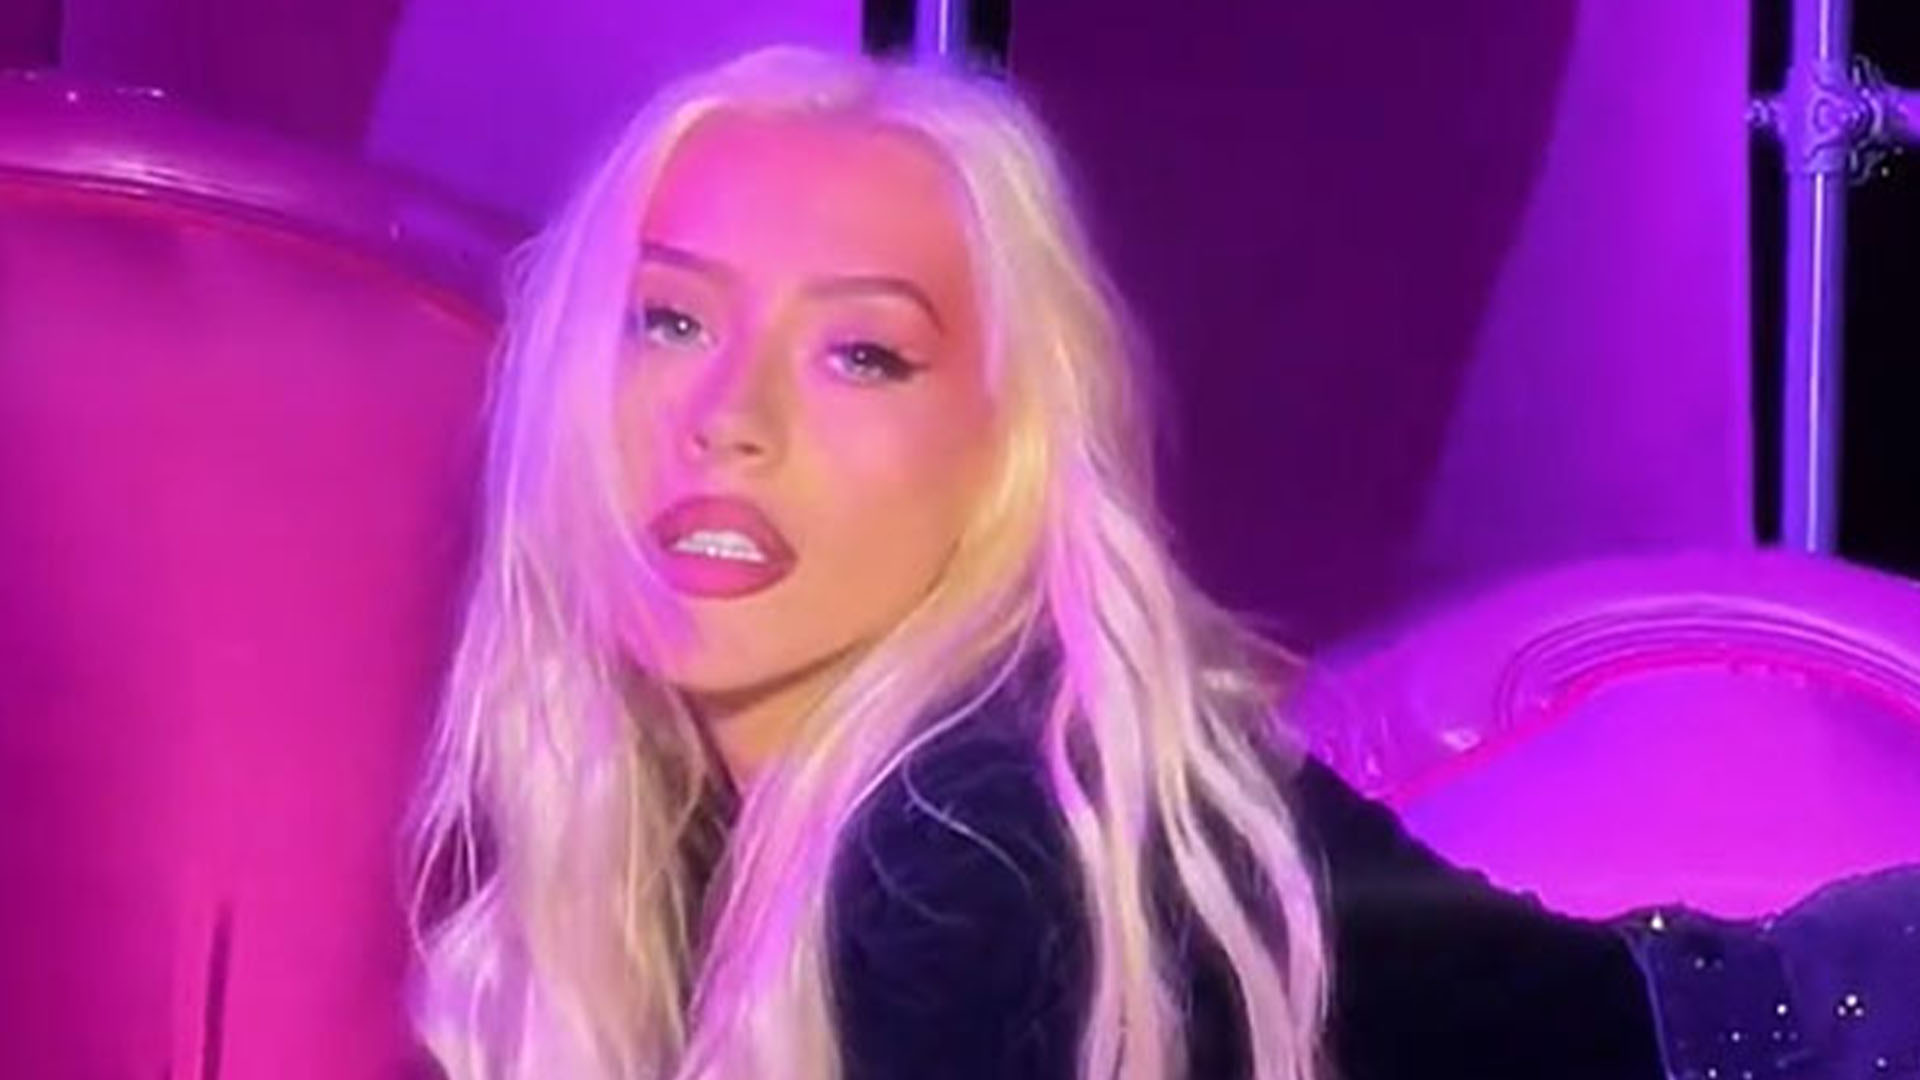 Christina Aguilera looks slimmer-than-ever as singer rolls around on couch in a mini skirt after 40lb weight loss [Video]